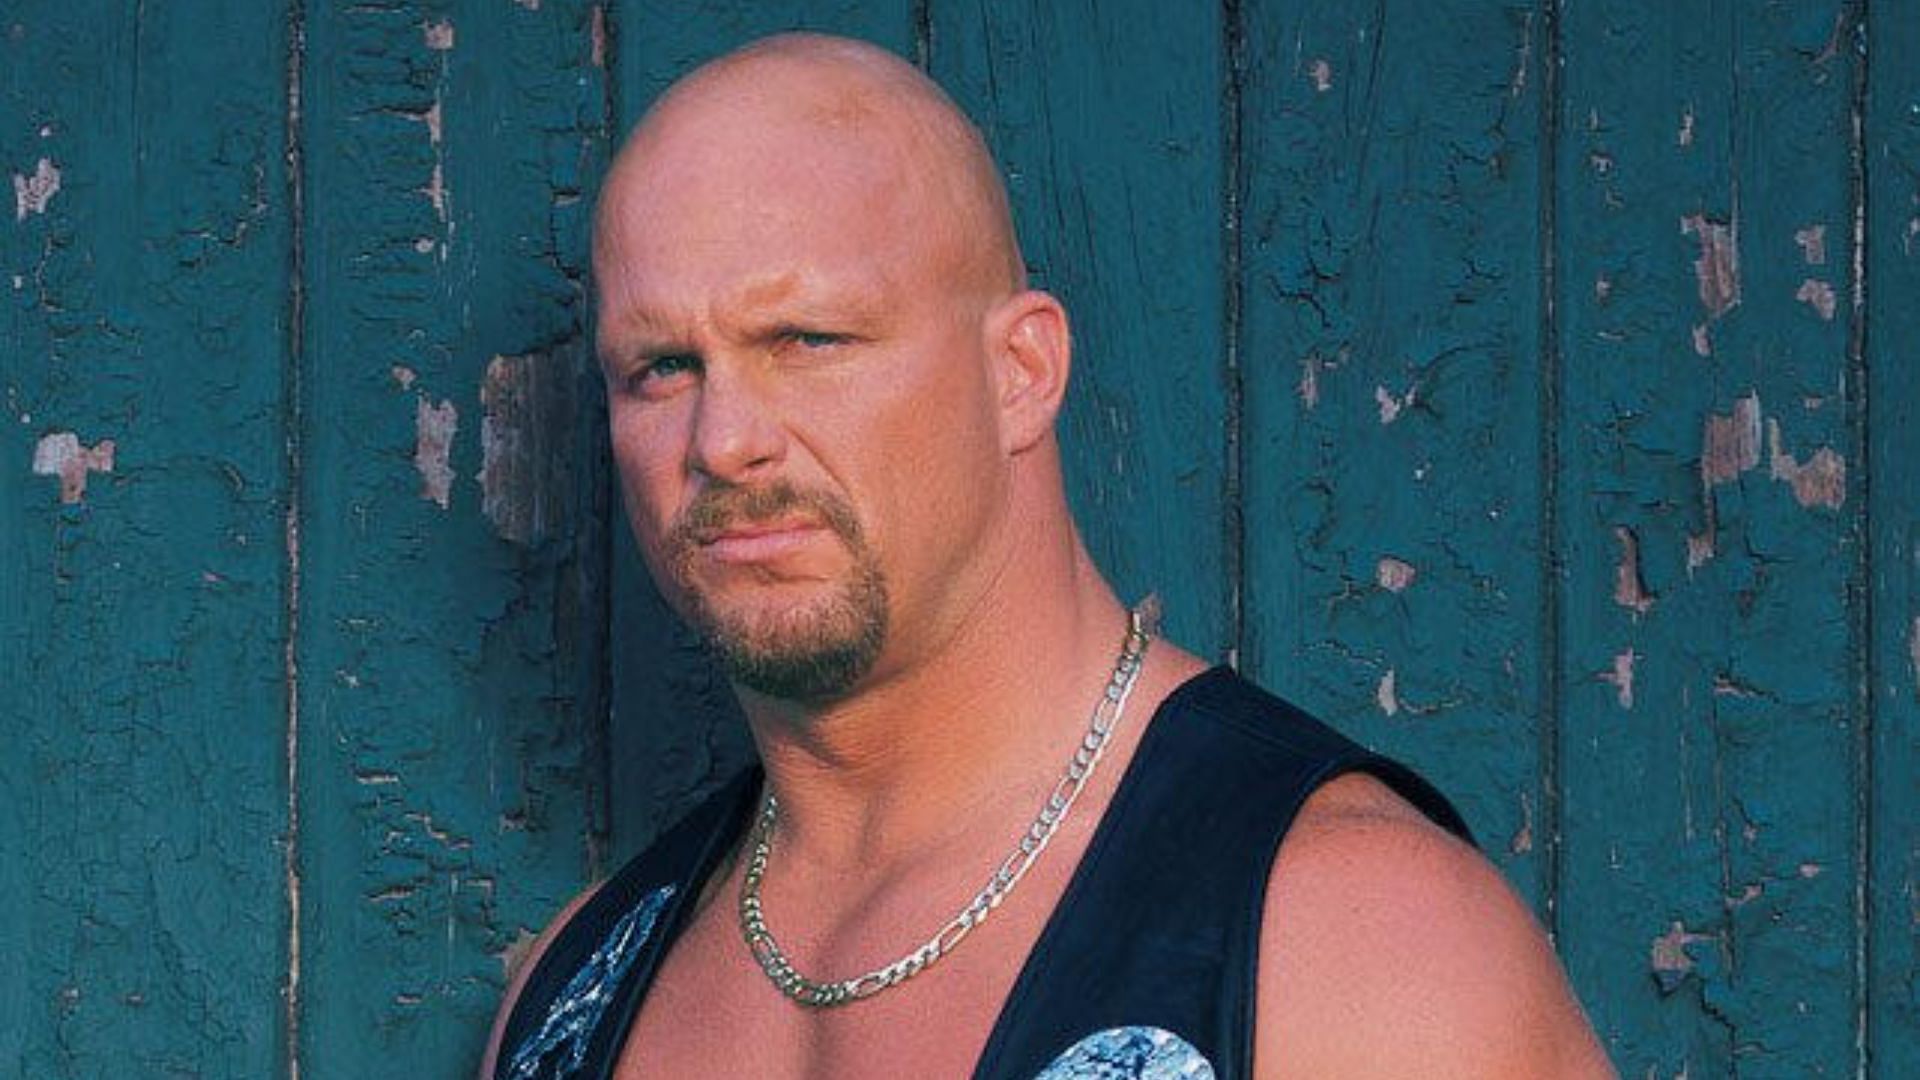 Steve Austin worked for WCW between 1991 and 1995